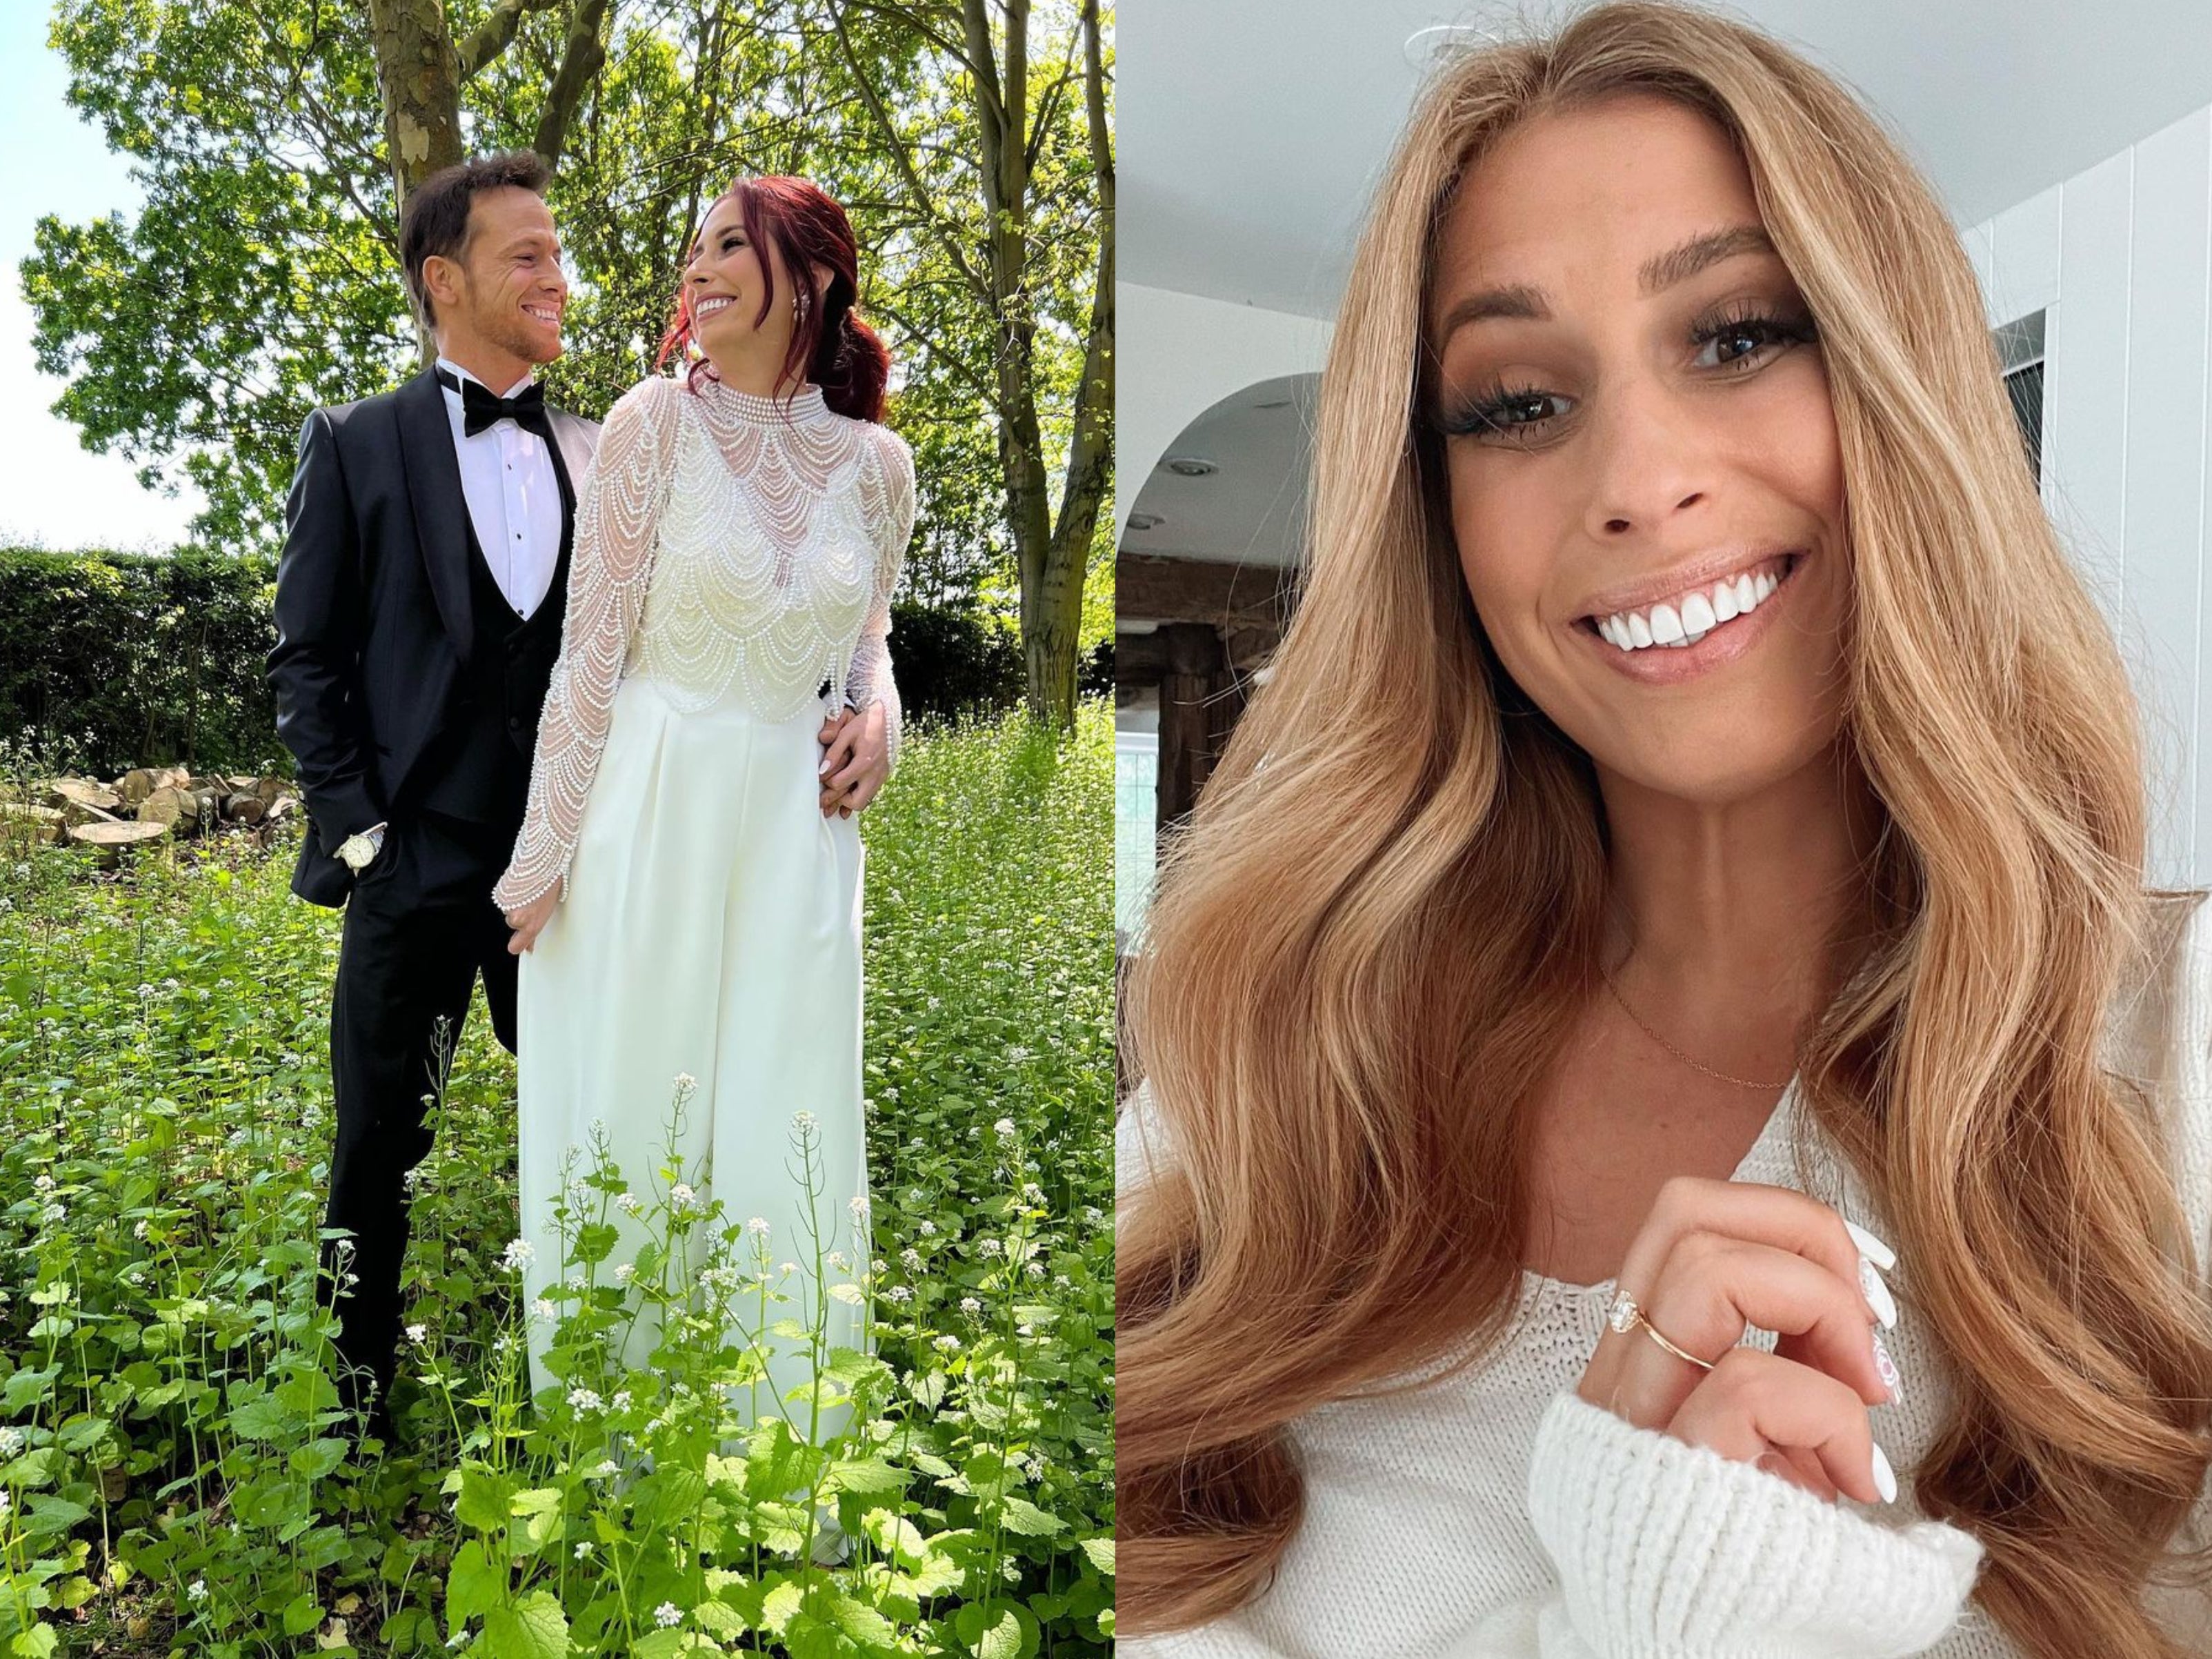 Stacey Solomon and Joe Swash are set to marry